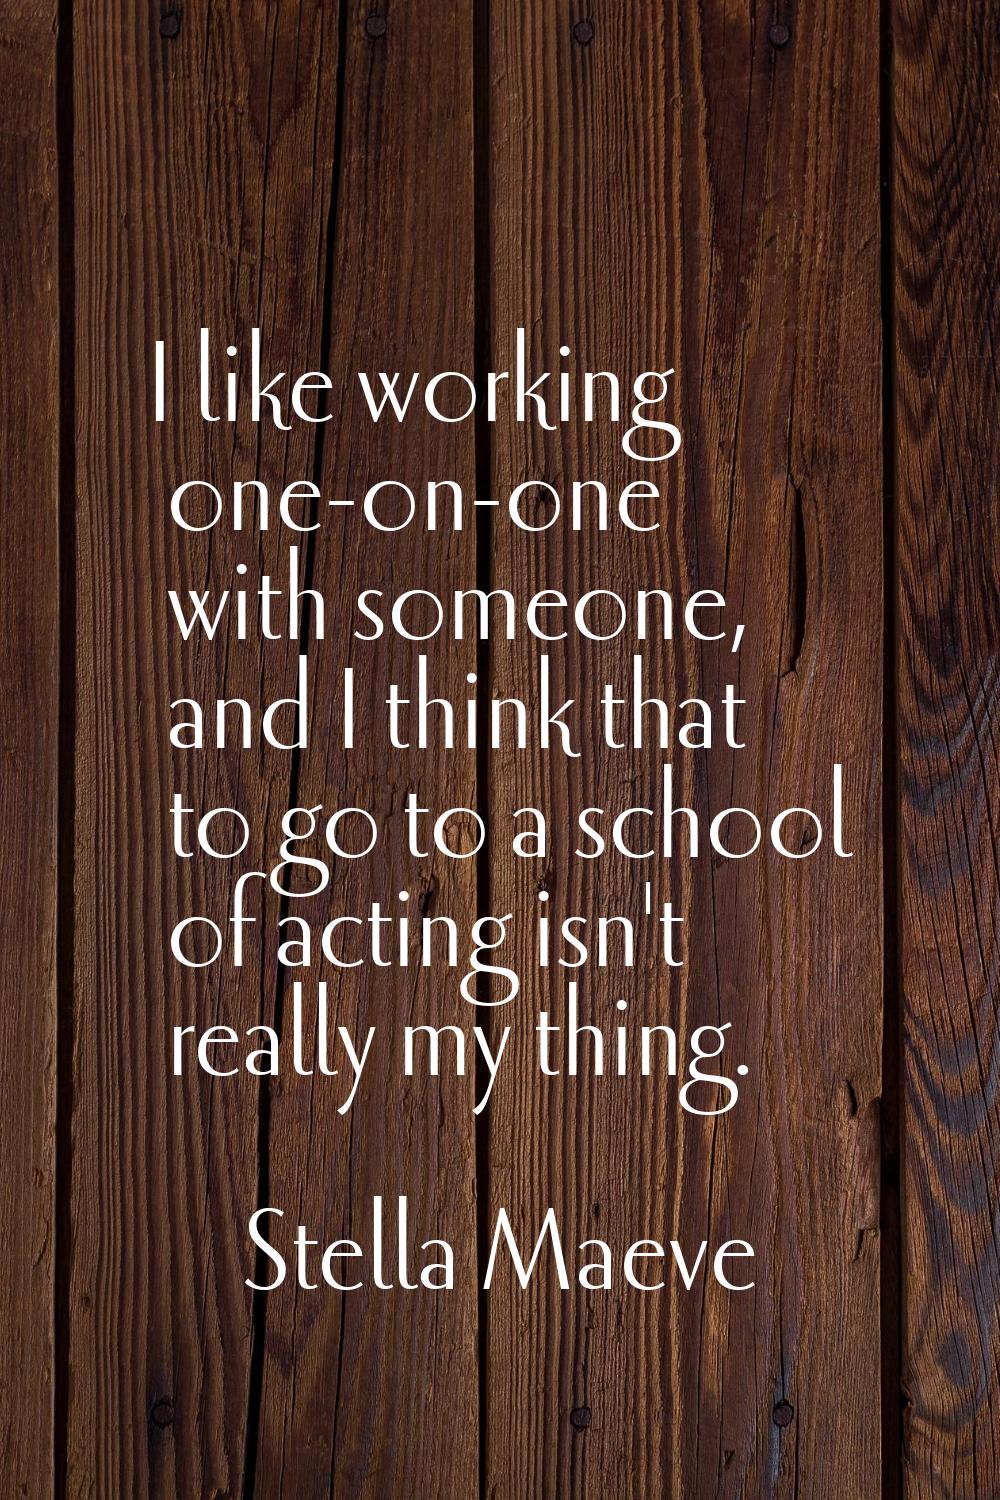 I like working one-on-one with someone, and I think that to go to a school of acting isn't really m